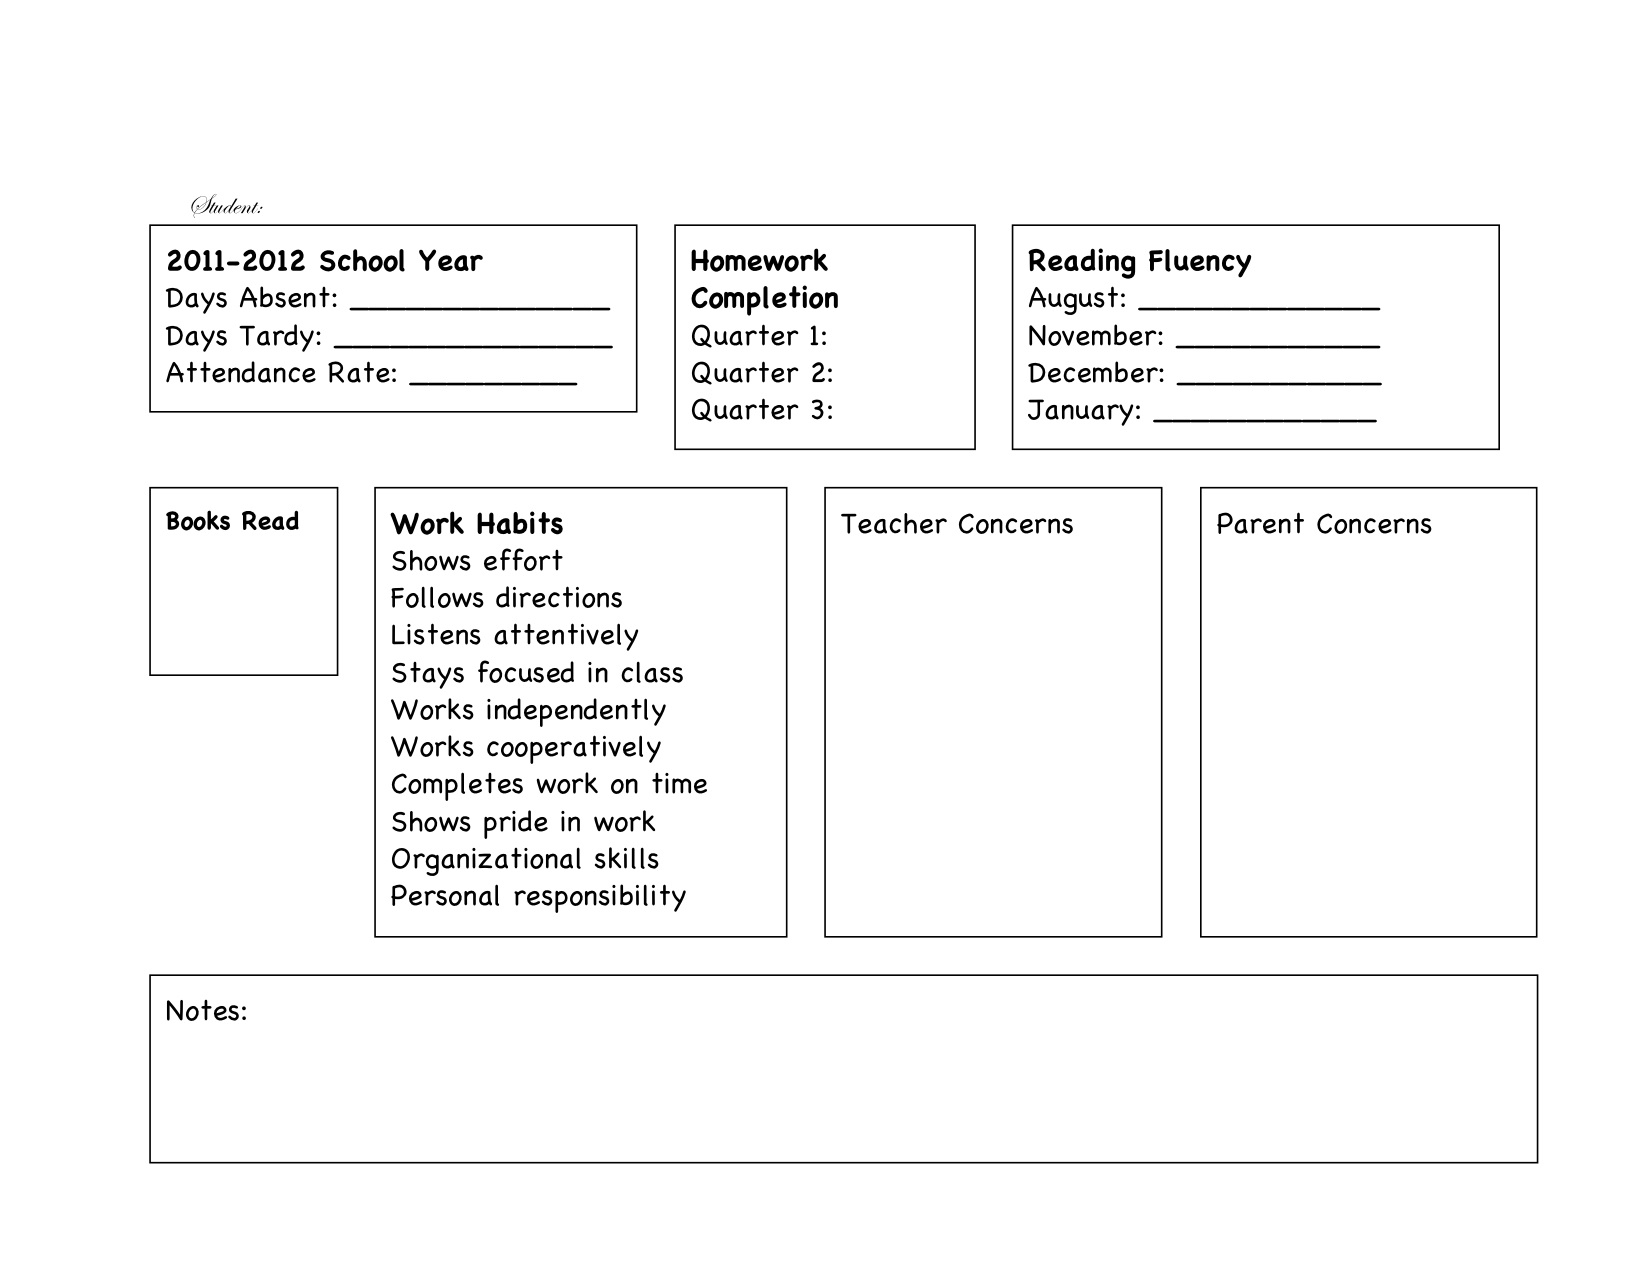 Conference Form  verystillnorthteaches For Parent Teacher Conference Checklist Template Pertaining To Parent Teacher Conference Checklist Template